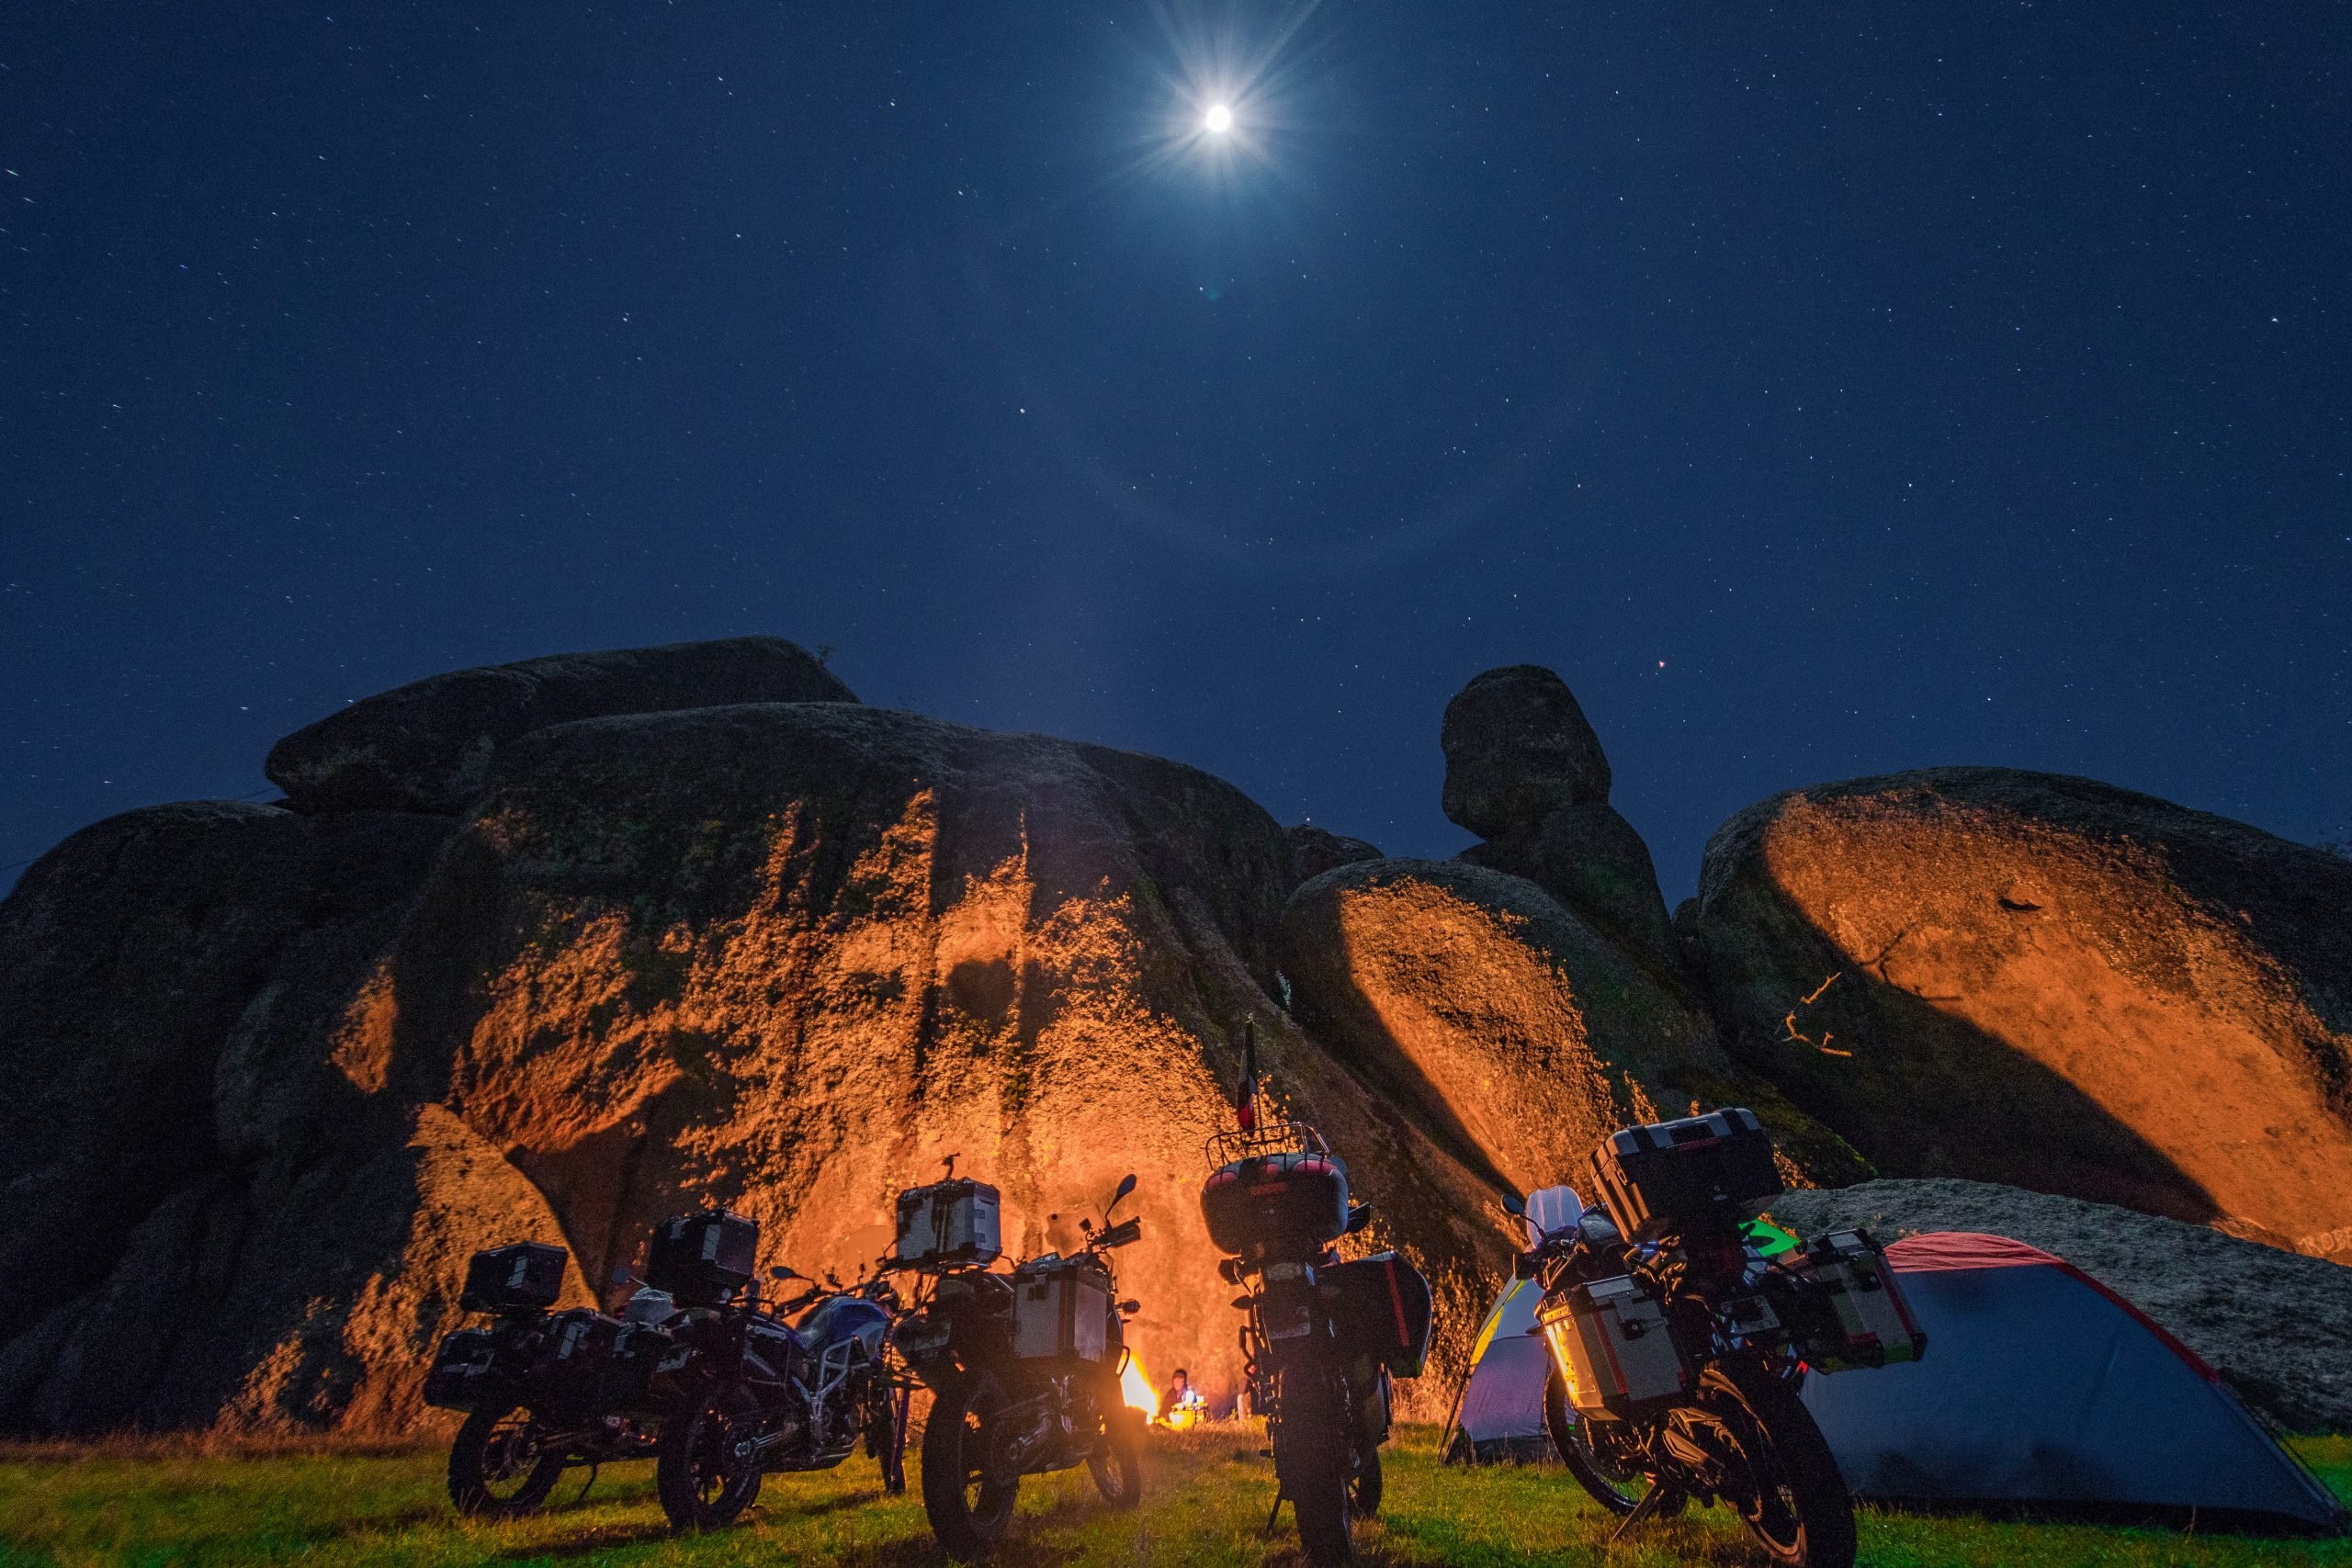 People camping by a boulder using it as a fire reflector